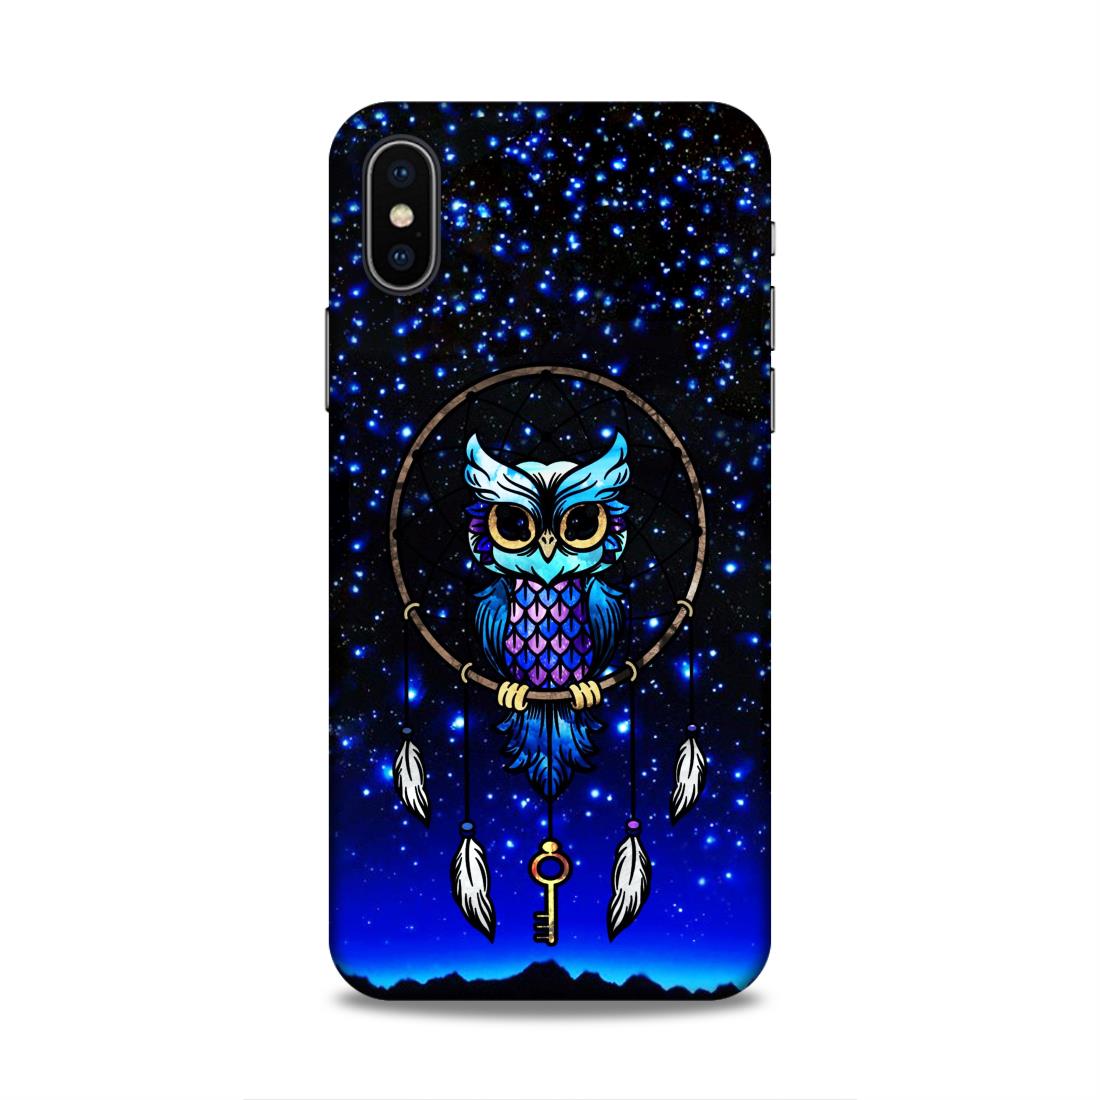 Dreamcatcher Owl Hard Back Case For Apple iPhone X/XS